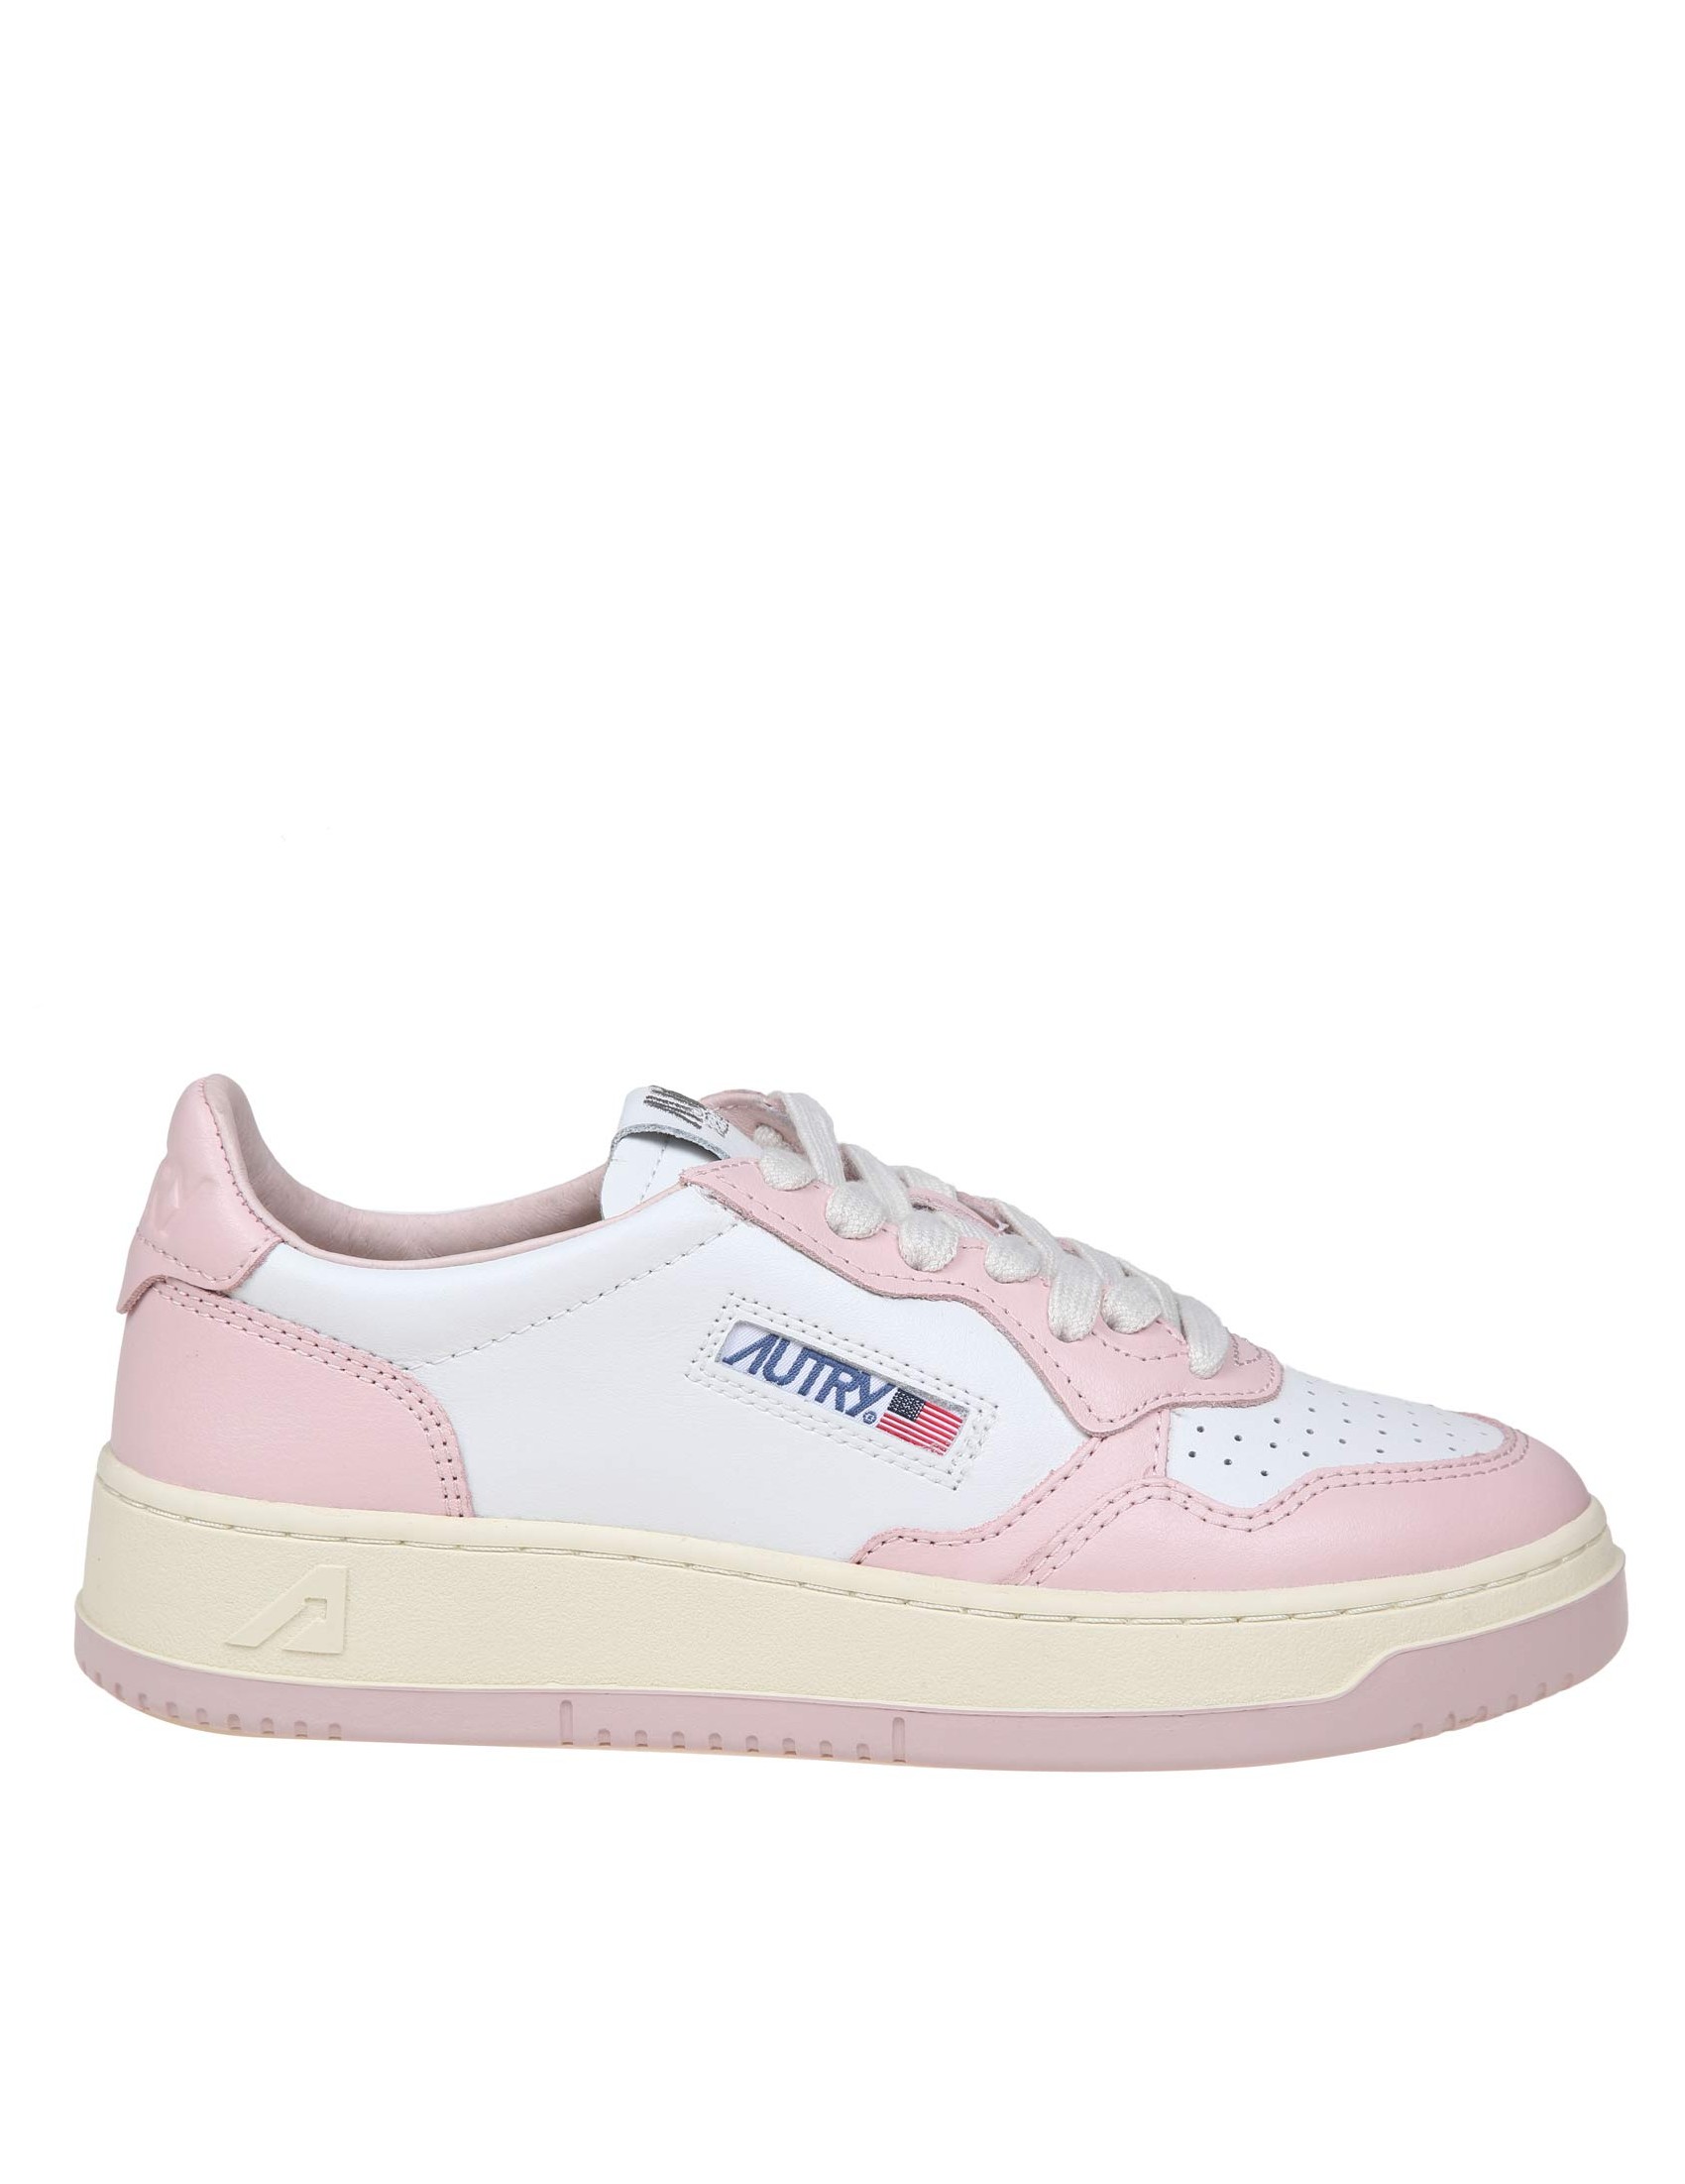 AUTRY MEDALIST SNEAKERS IN WHITE/PINK LEATHER